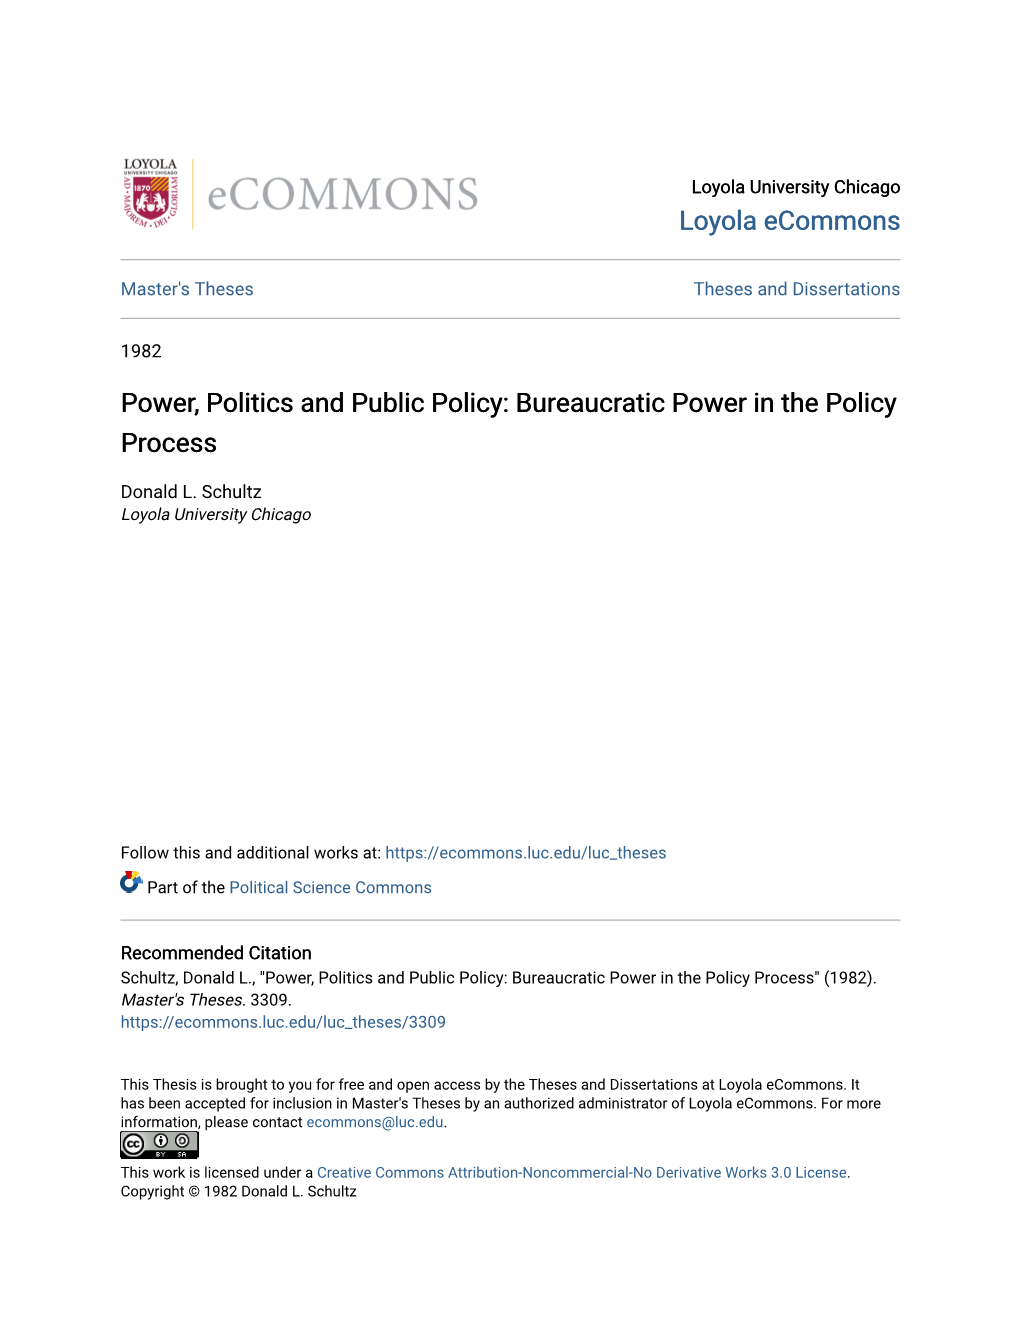 Power, Politics and Public Policy: Bureaucratic Power in the Policy Process